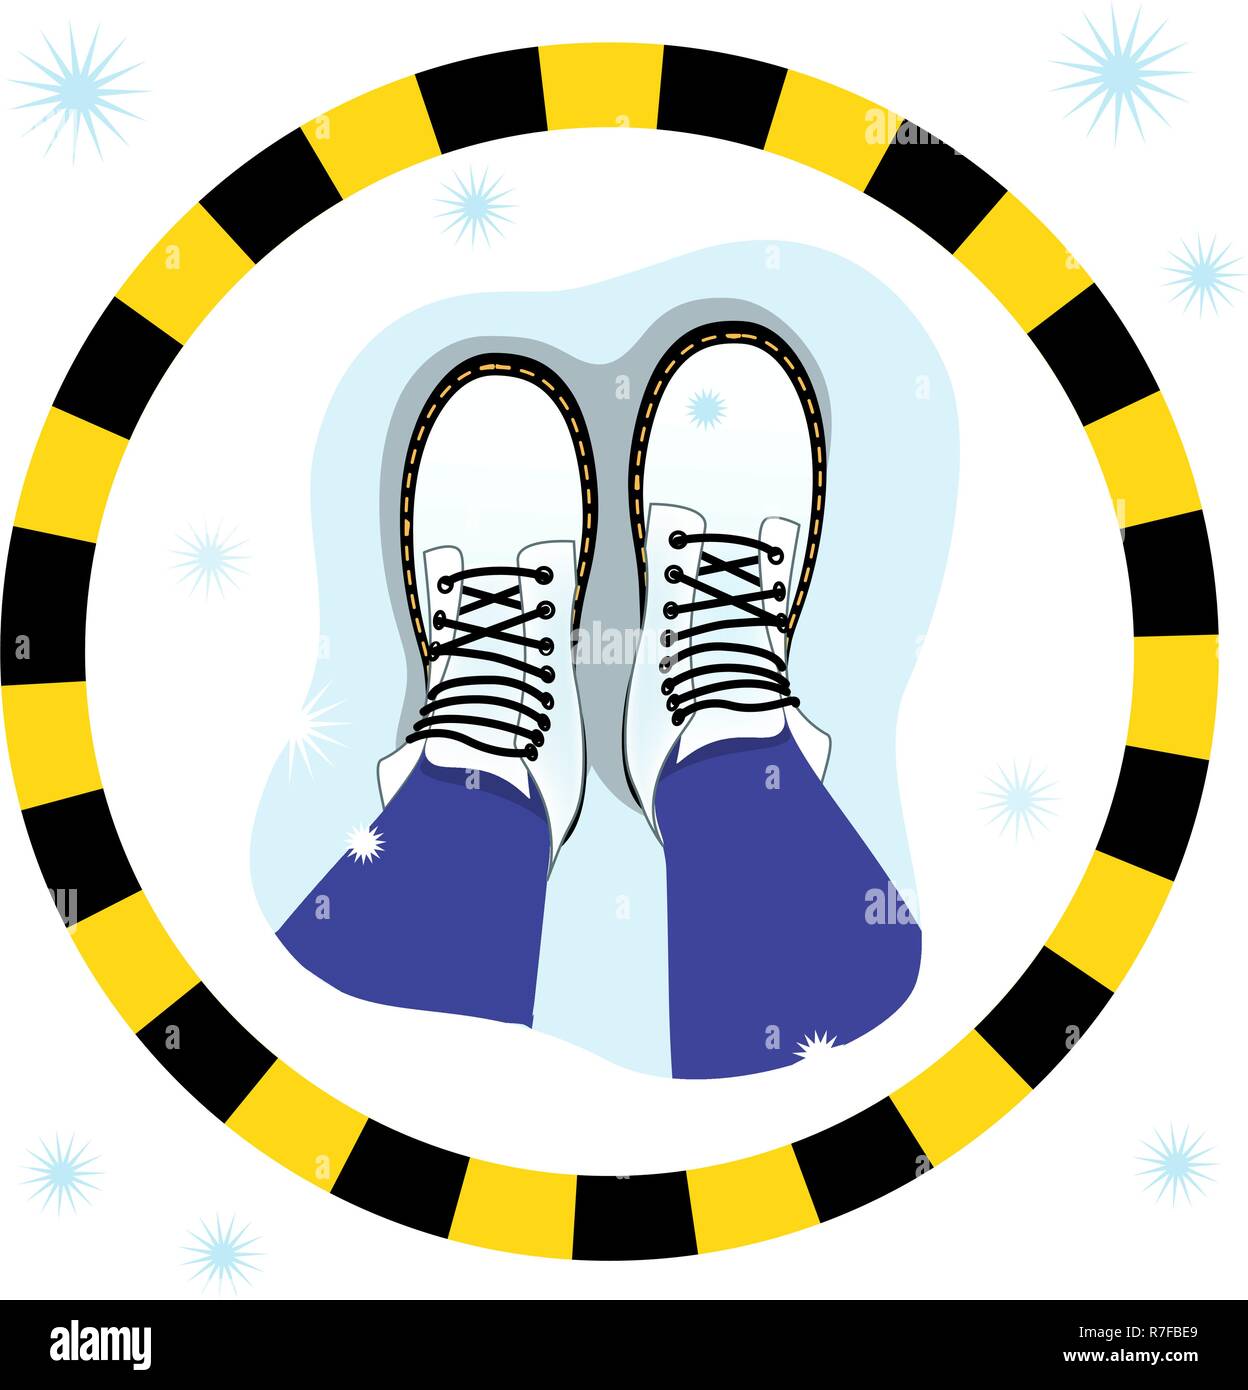 Vector illustration of the top view of the female legs in boots on the snow, in circle stripe. The psychological concept of personal boundaries Stock Vector